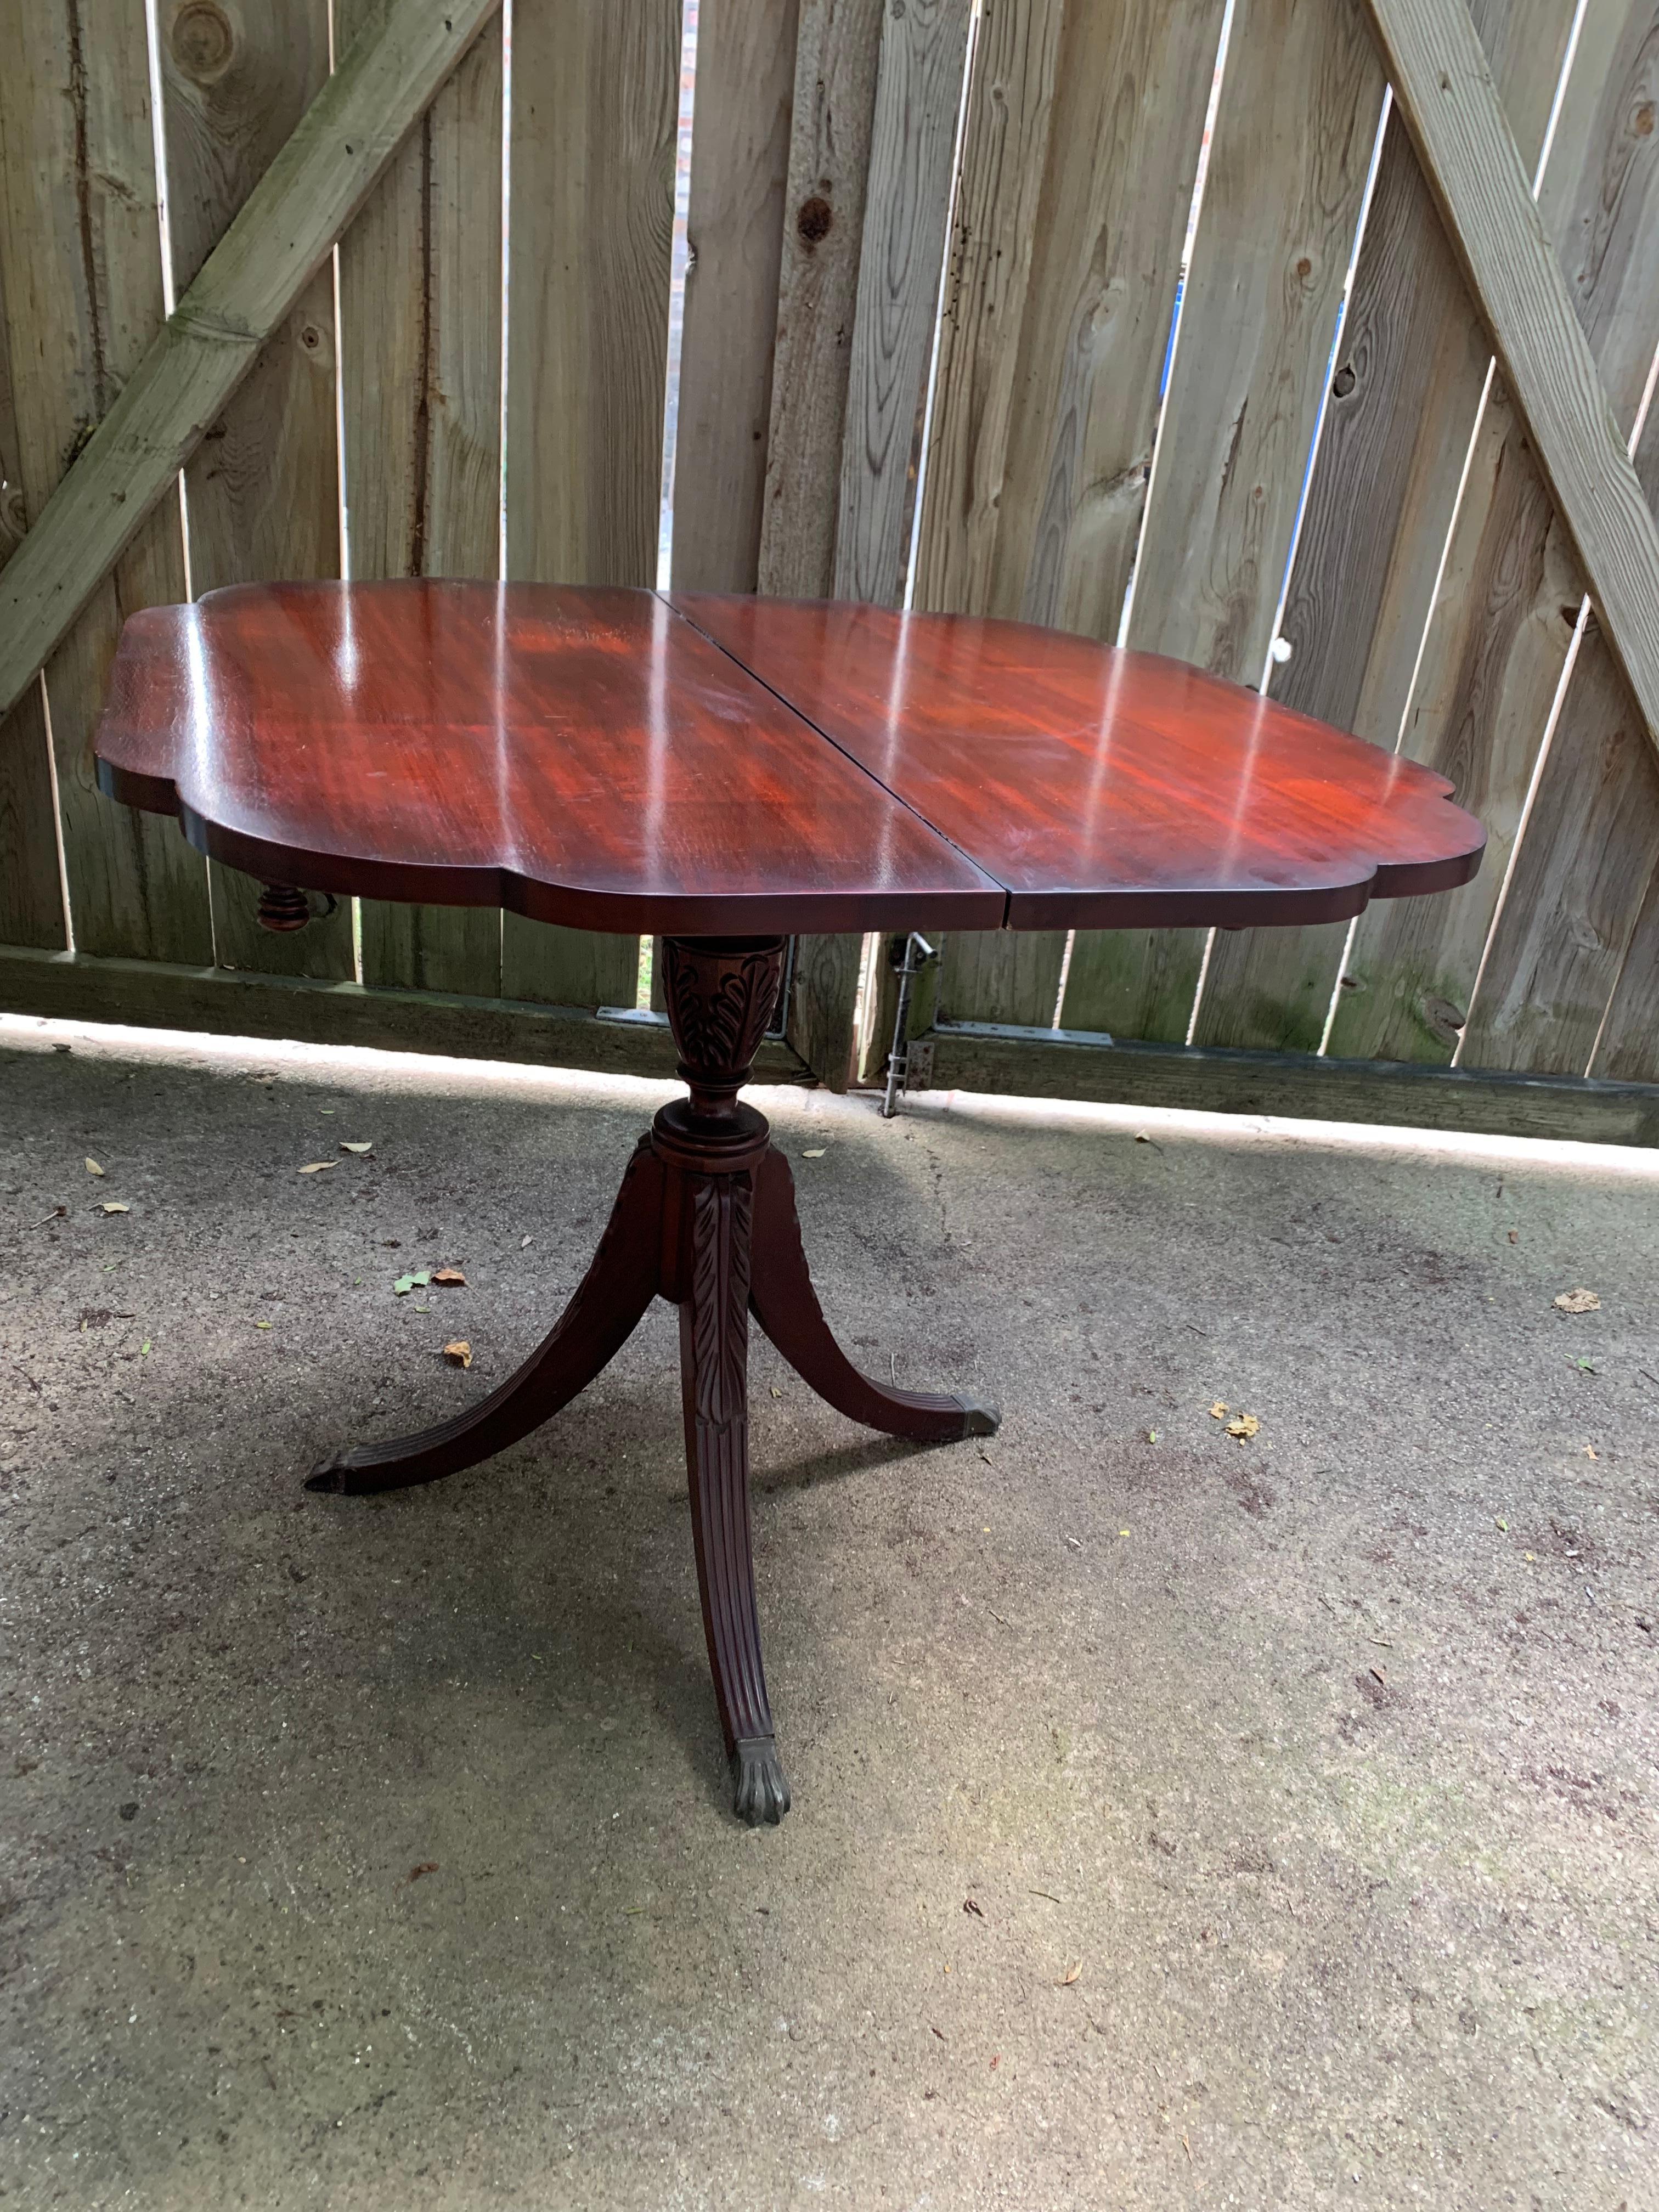 Vintage polished wood drop-leaf game or center table
High gloss wood table
Drop leaf scallop edge
spider leg
use as console, tea table or center table
game table or entryway,
midcentury
beautiful and unique.